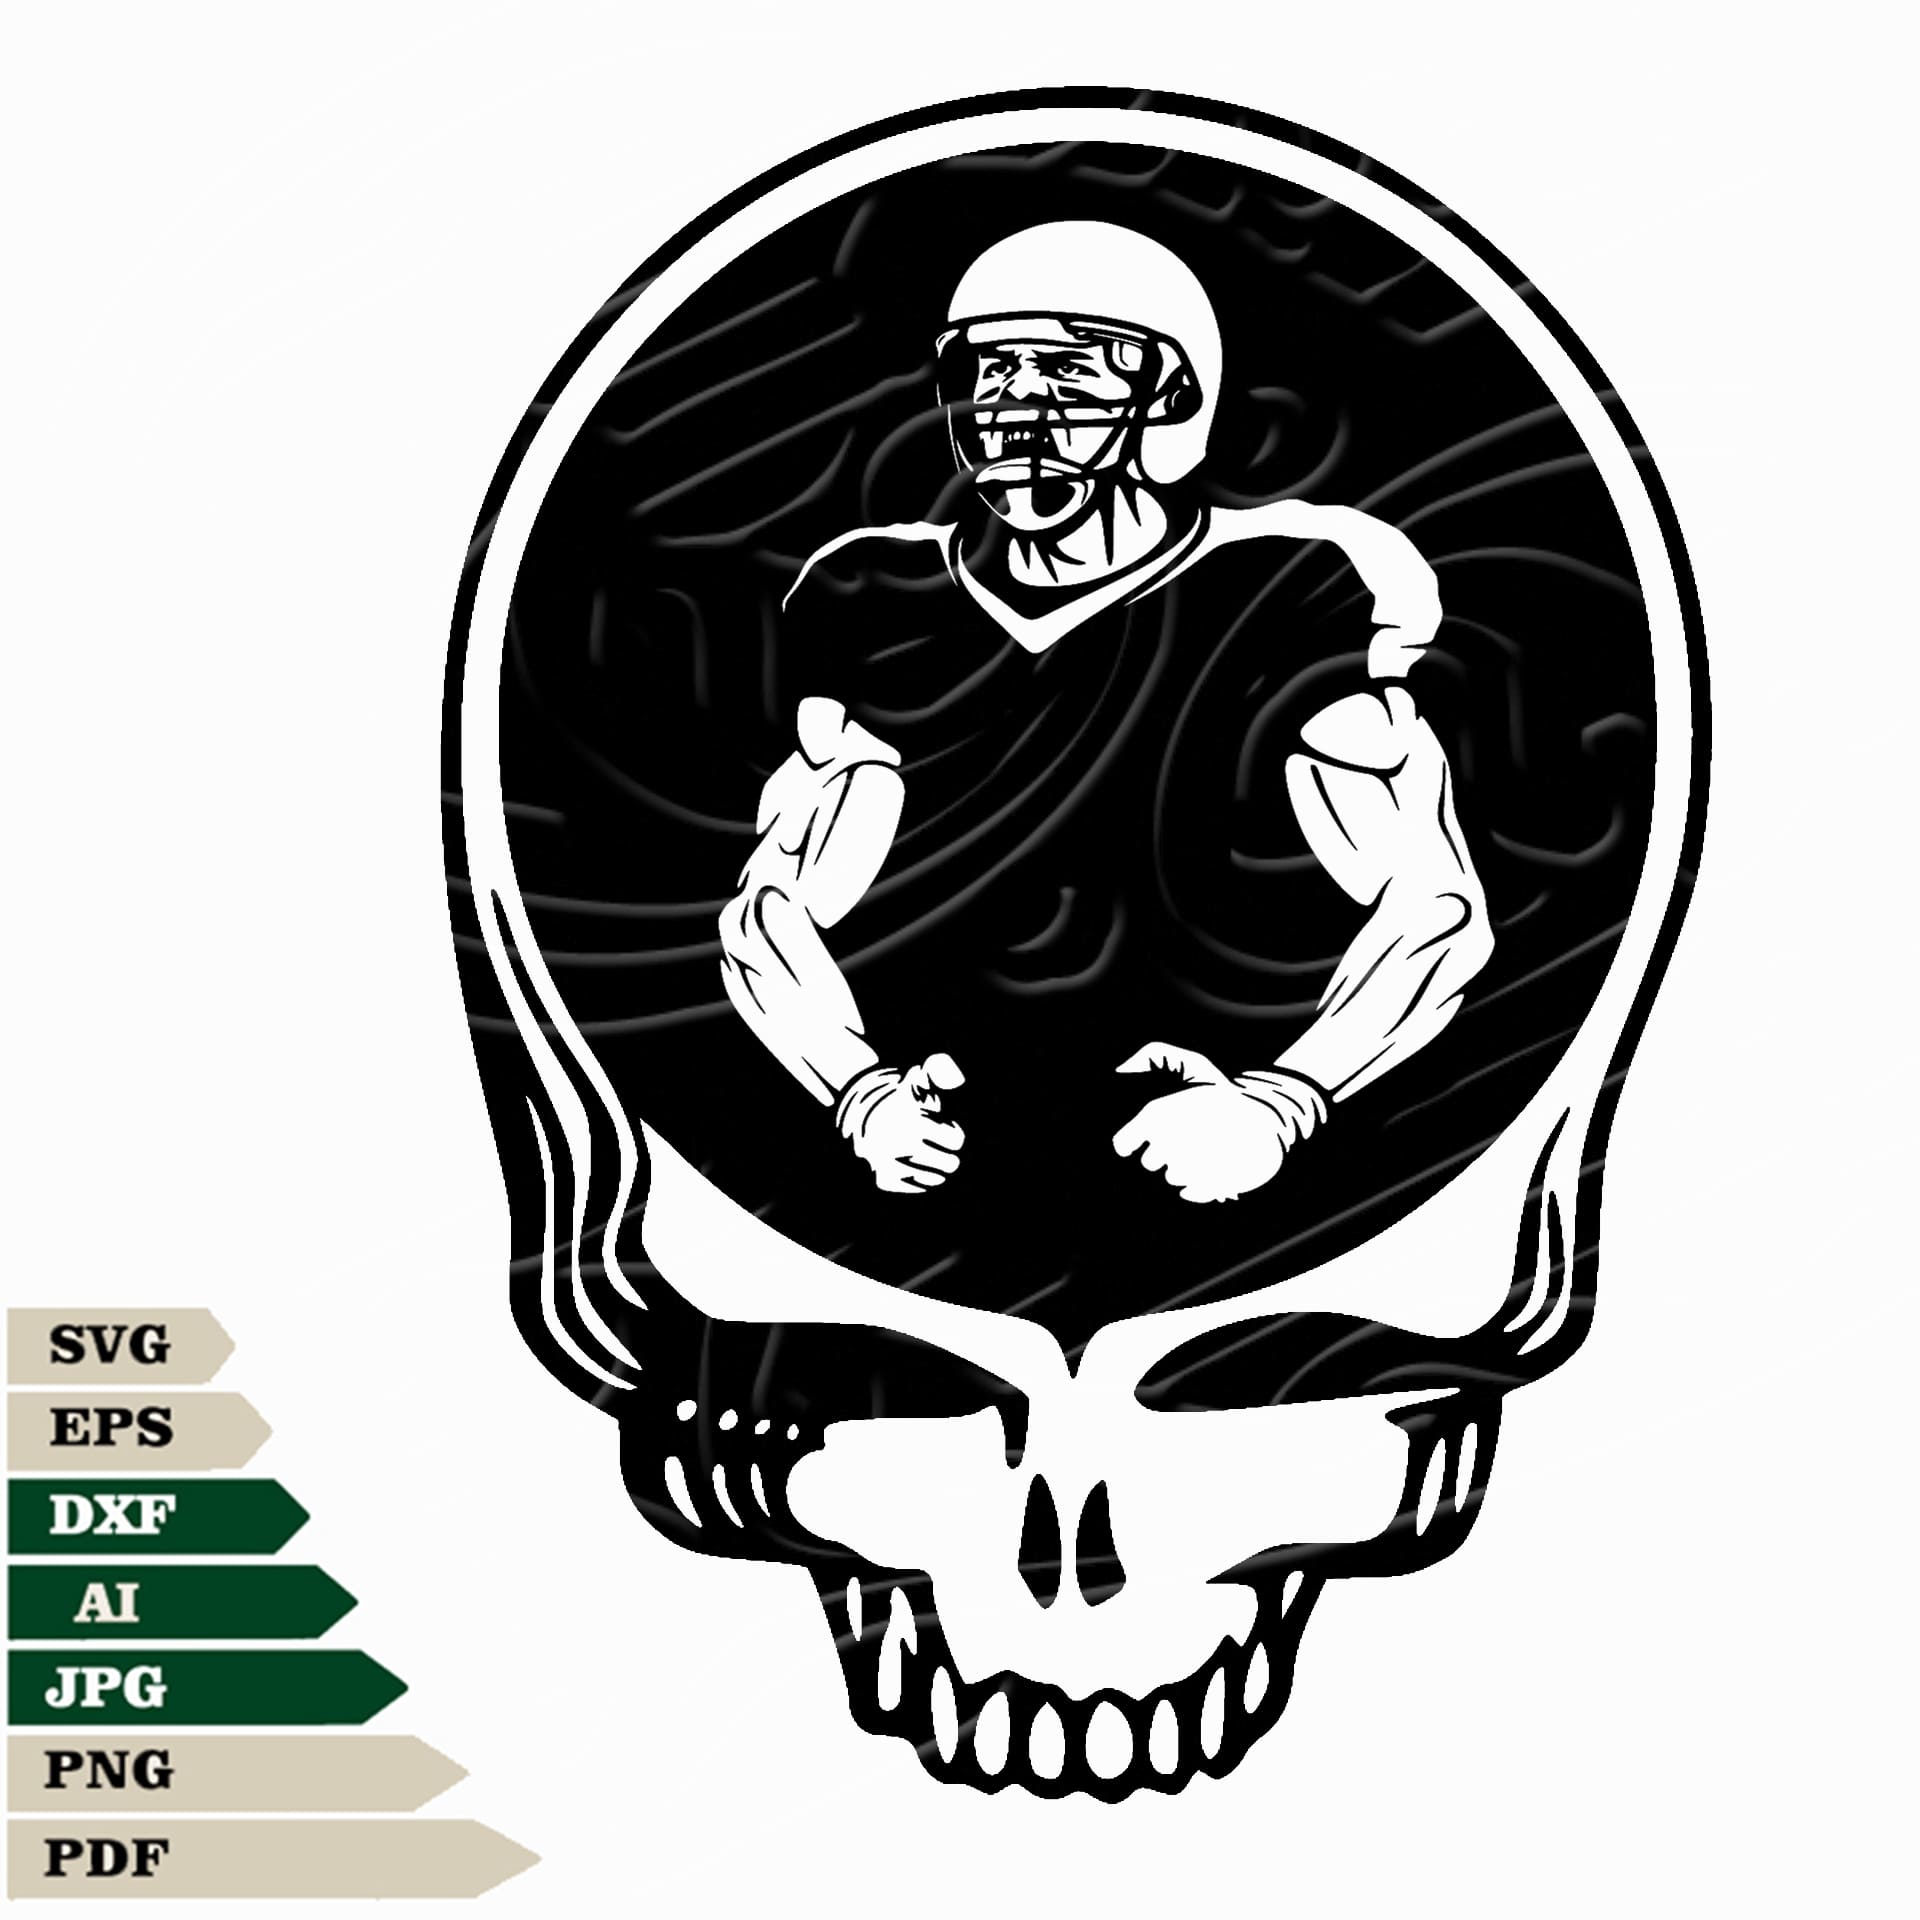 Show your team spirit with this American Football SVG file. Professional vector graphics make it perfect for cricut projects or tattoos. Get amazing detail with the Football Player in Skull PNG and American Football Player SVG design. Show off your team pride with this stylish SVG file.